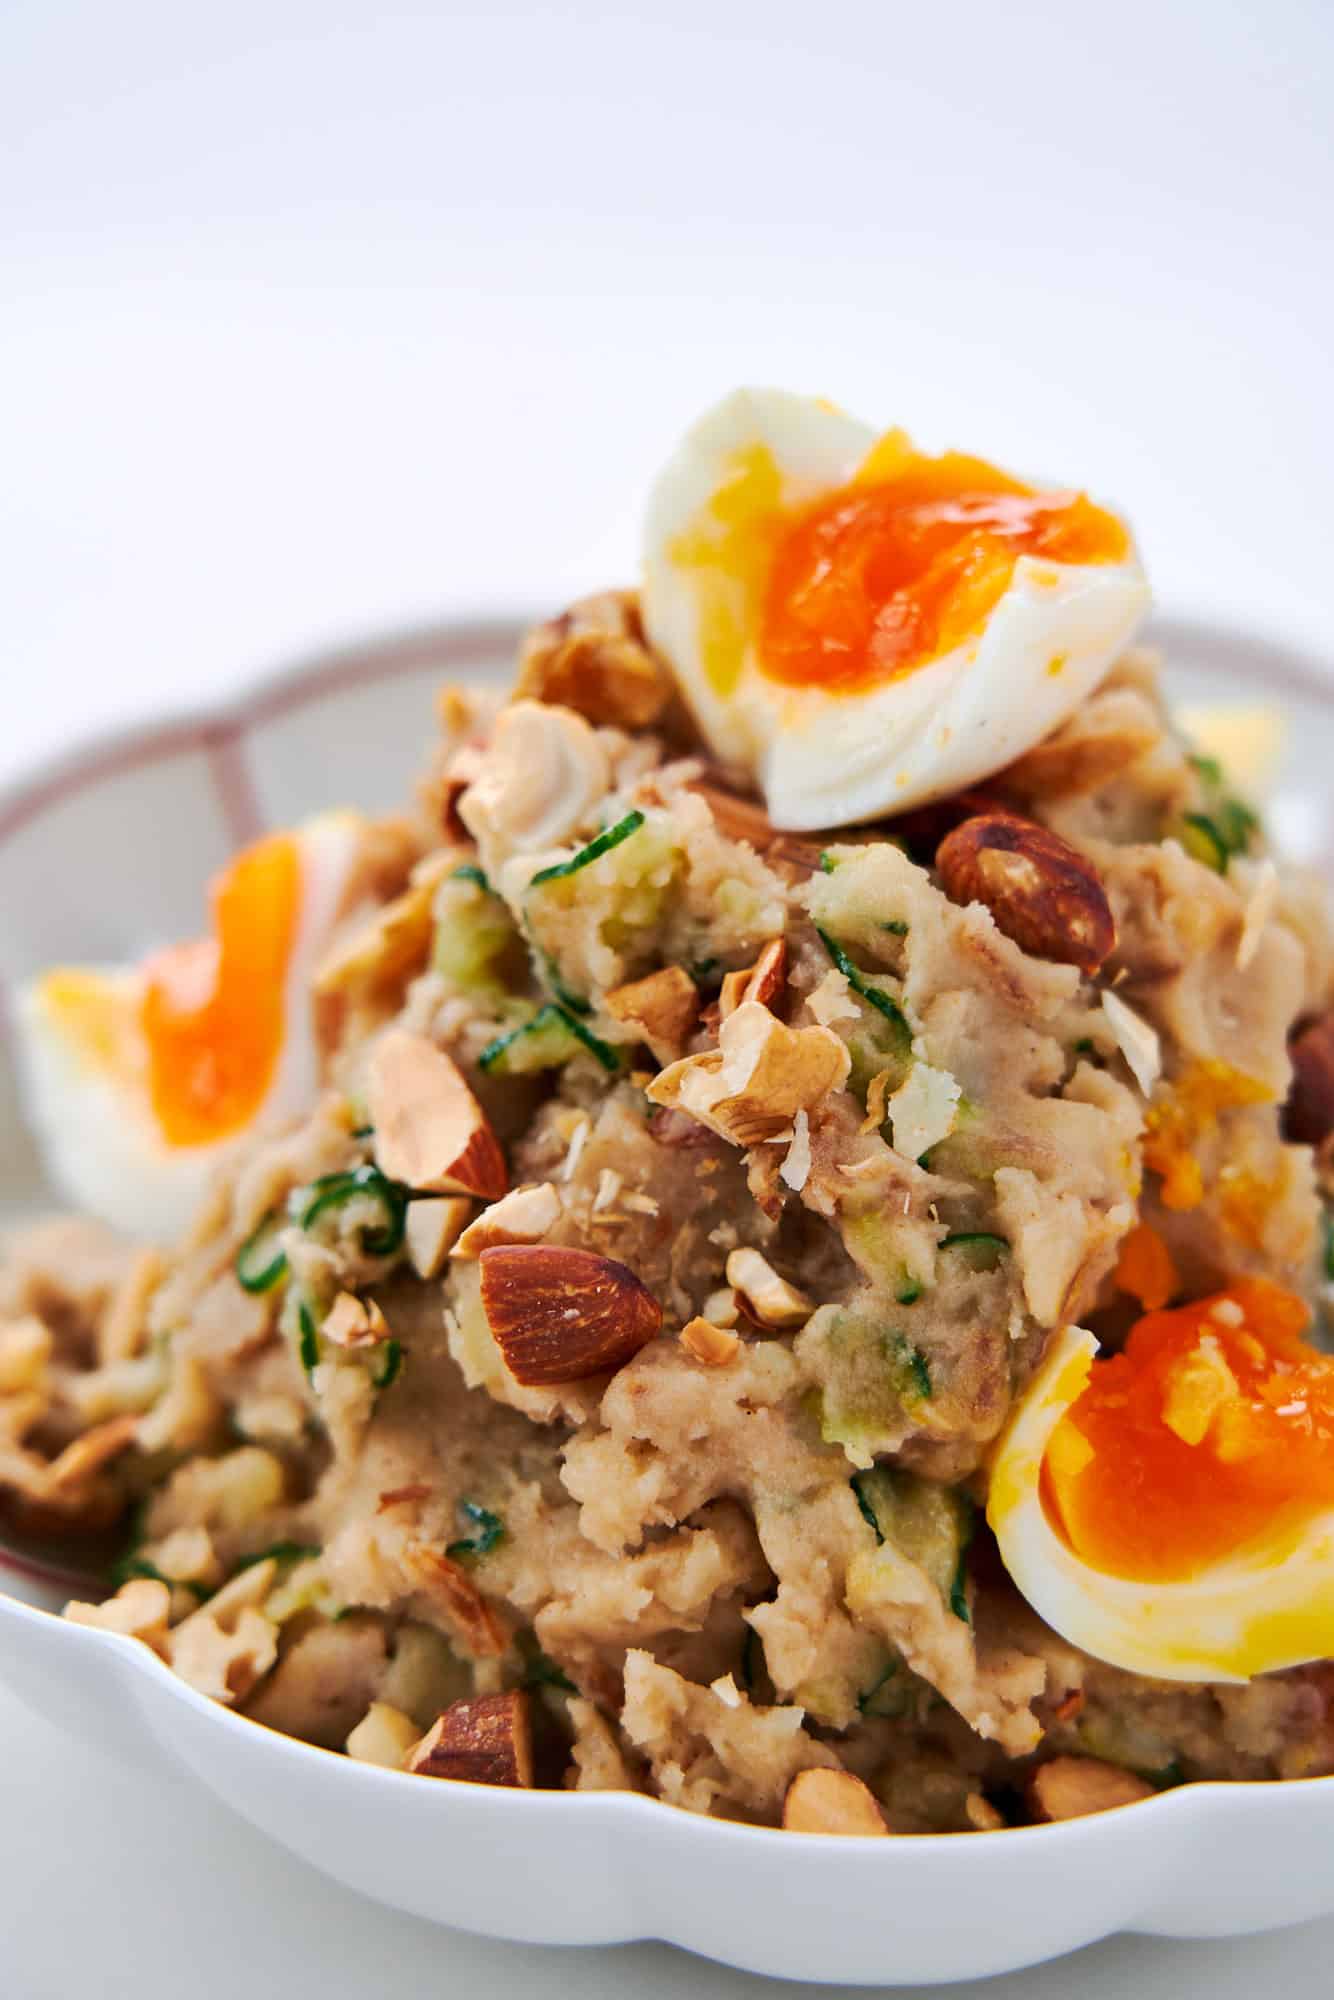 Five spice potato salad with smoked nuts and soft boiled eggs.